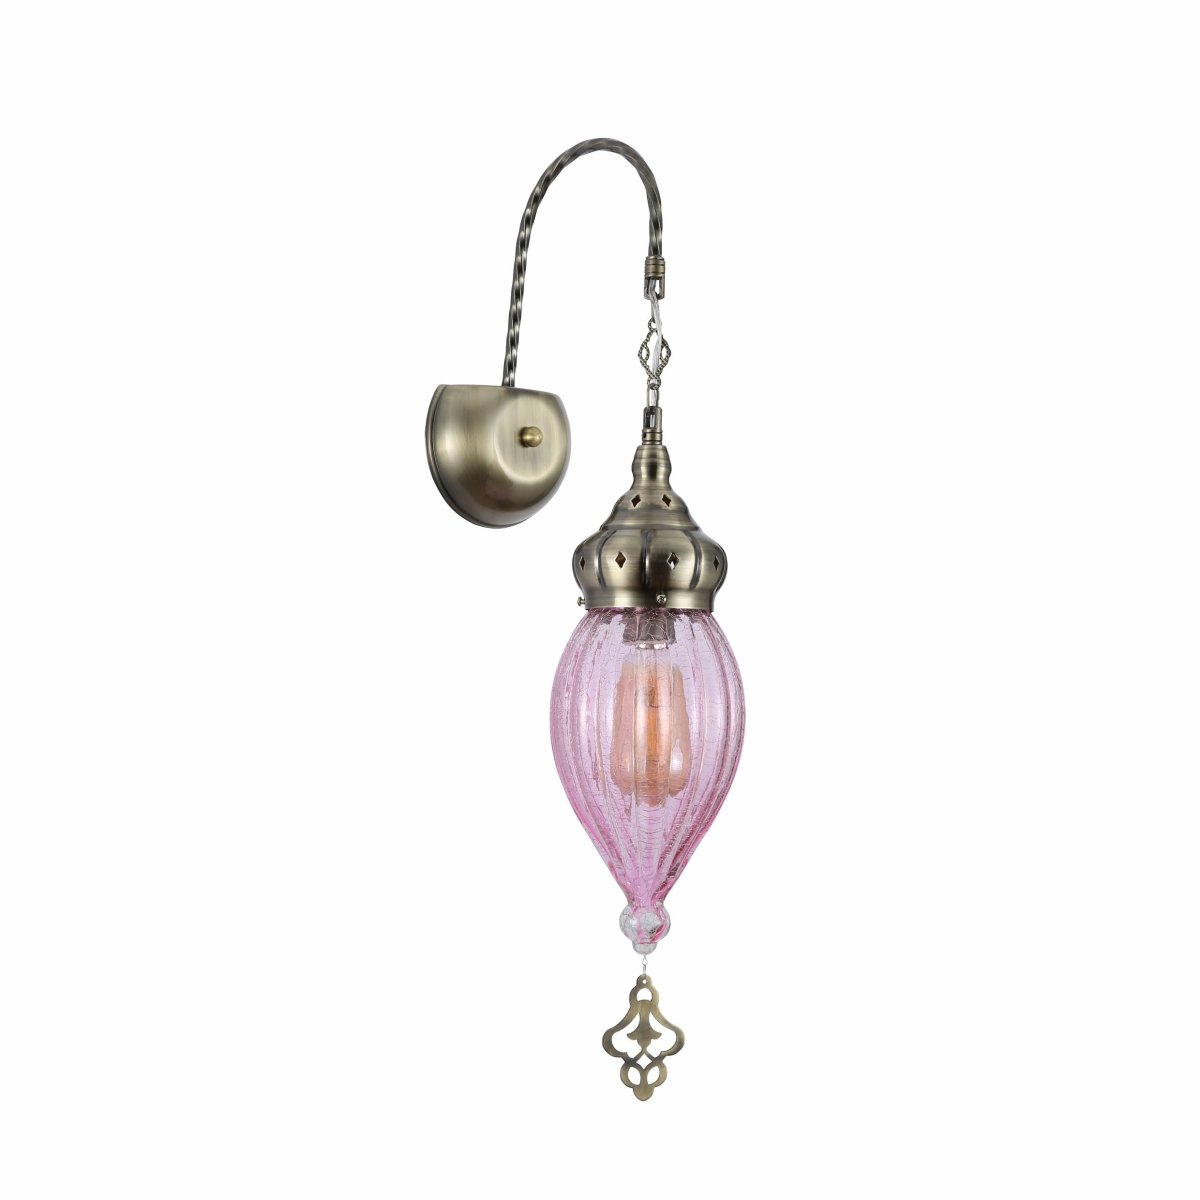 Main image of Pink Glass Antique Bronze Metal Body Moroccan Style Wall Light with E27 Fitting | TEKLED 151-194584